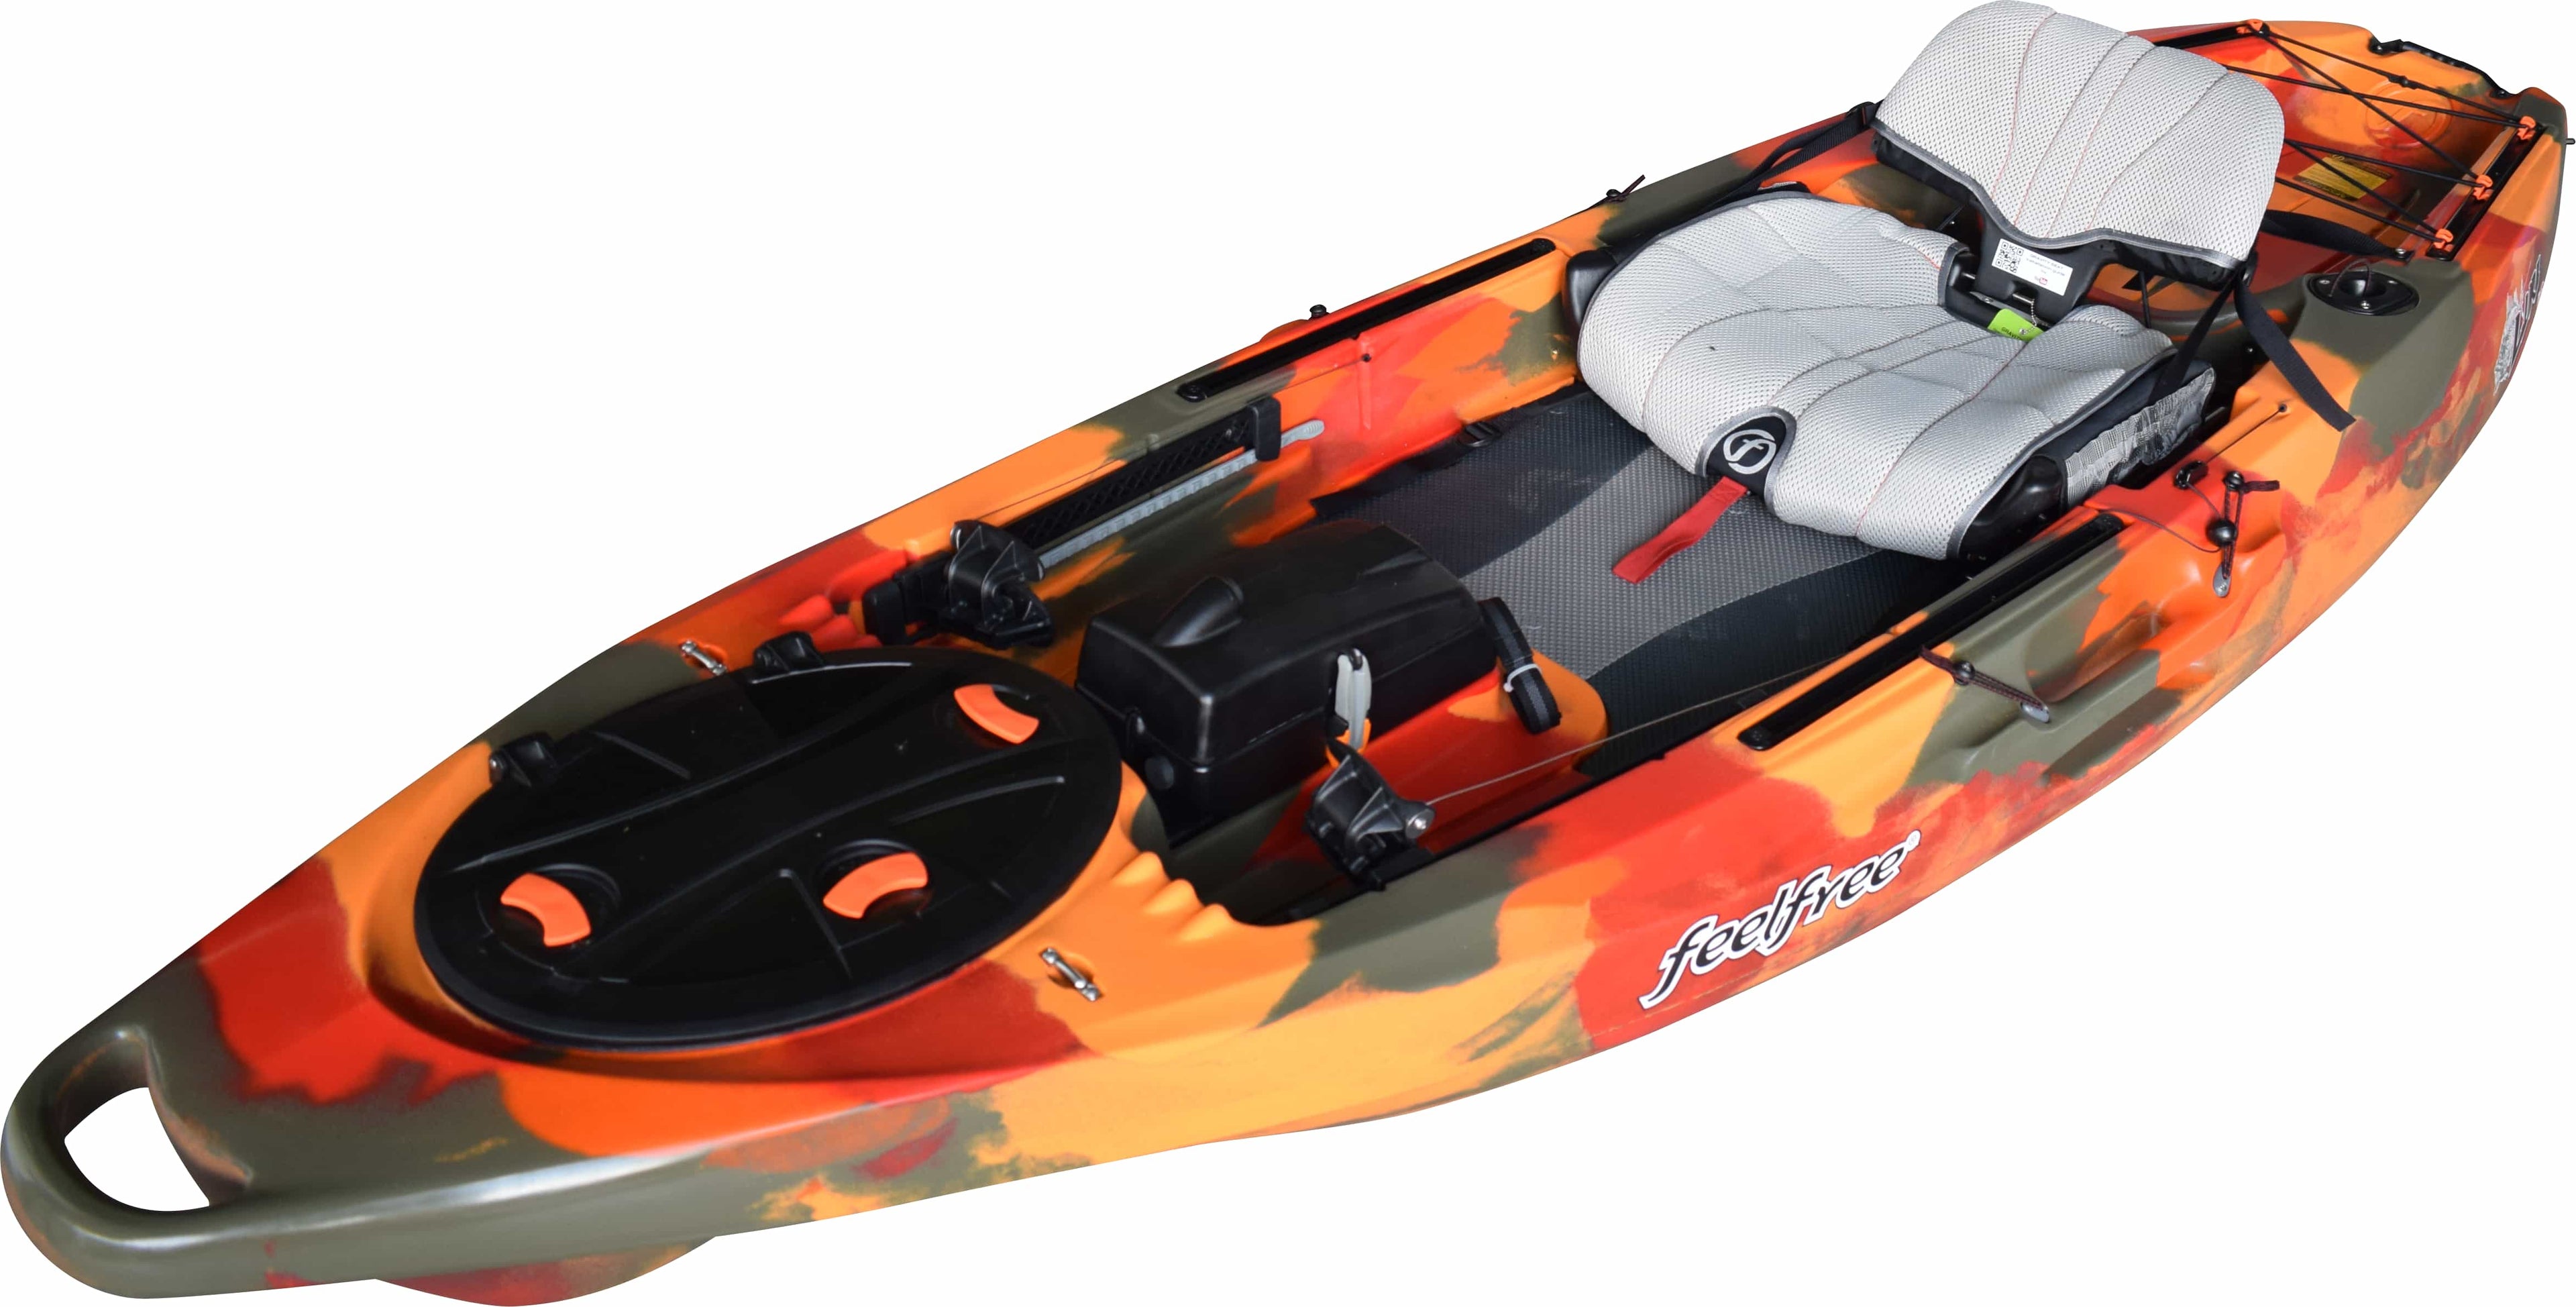 Lure kayak for rivers and lakes with very comfortable seat – Feel Free